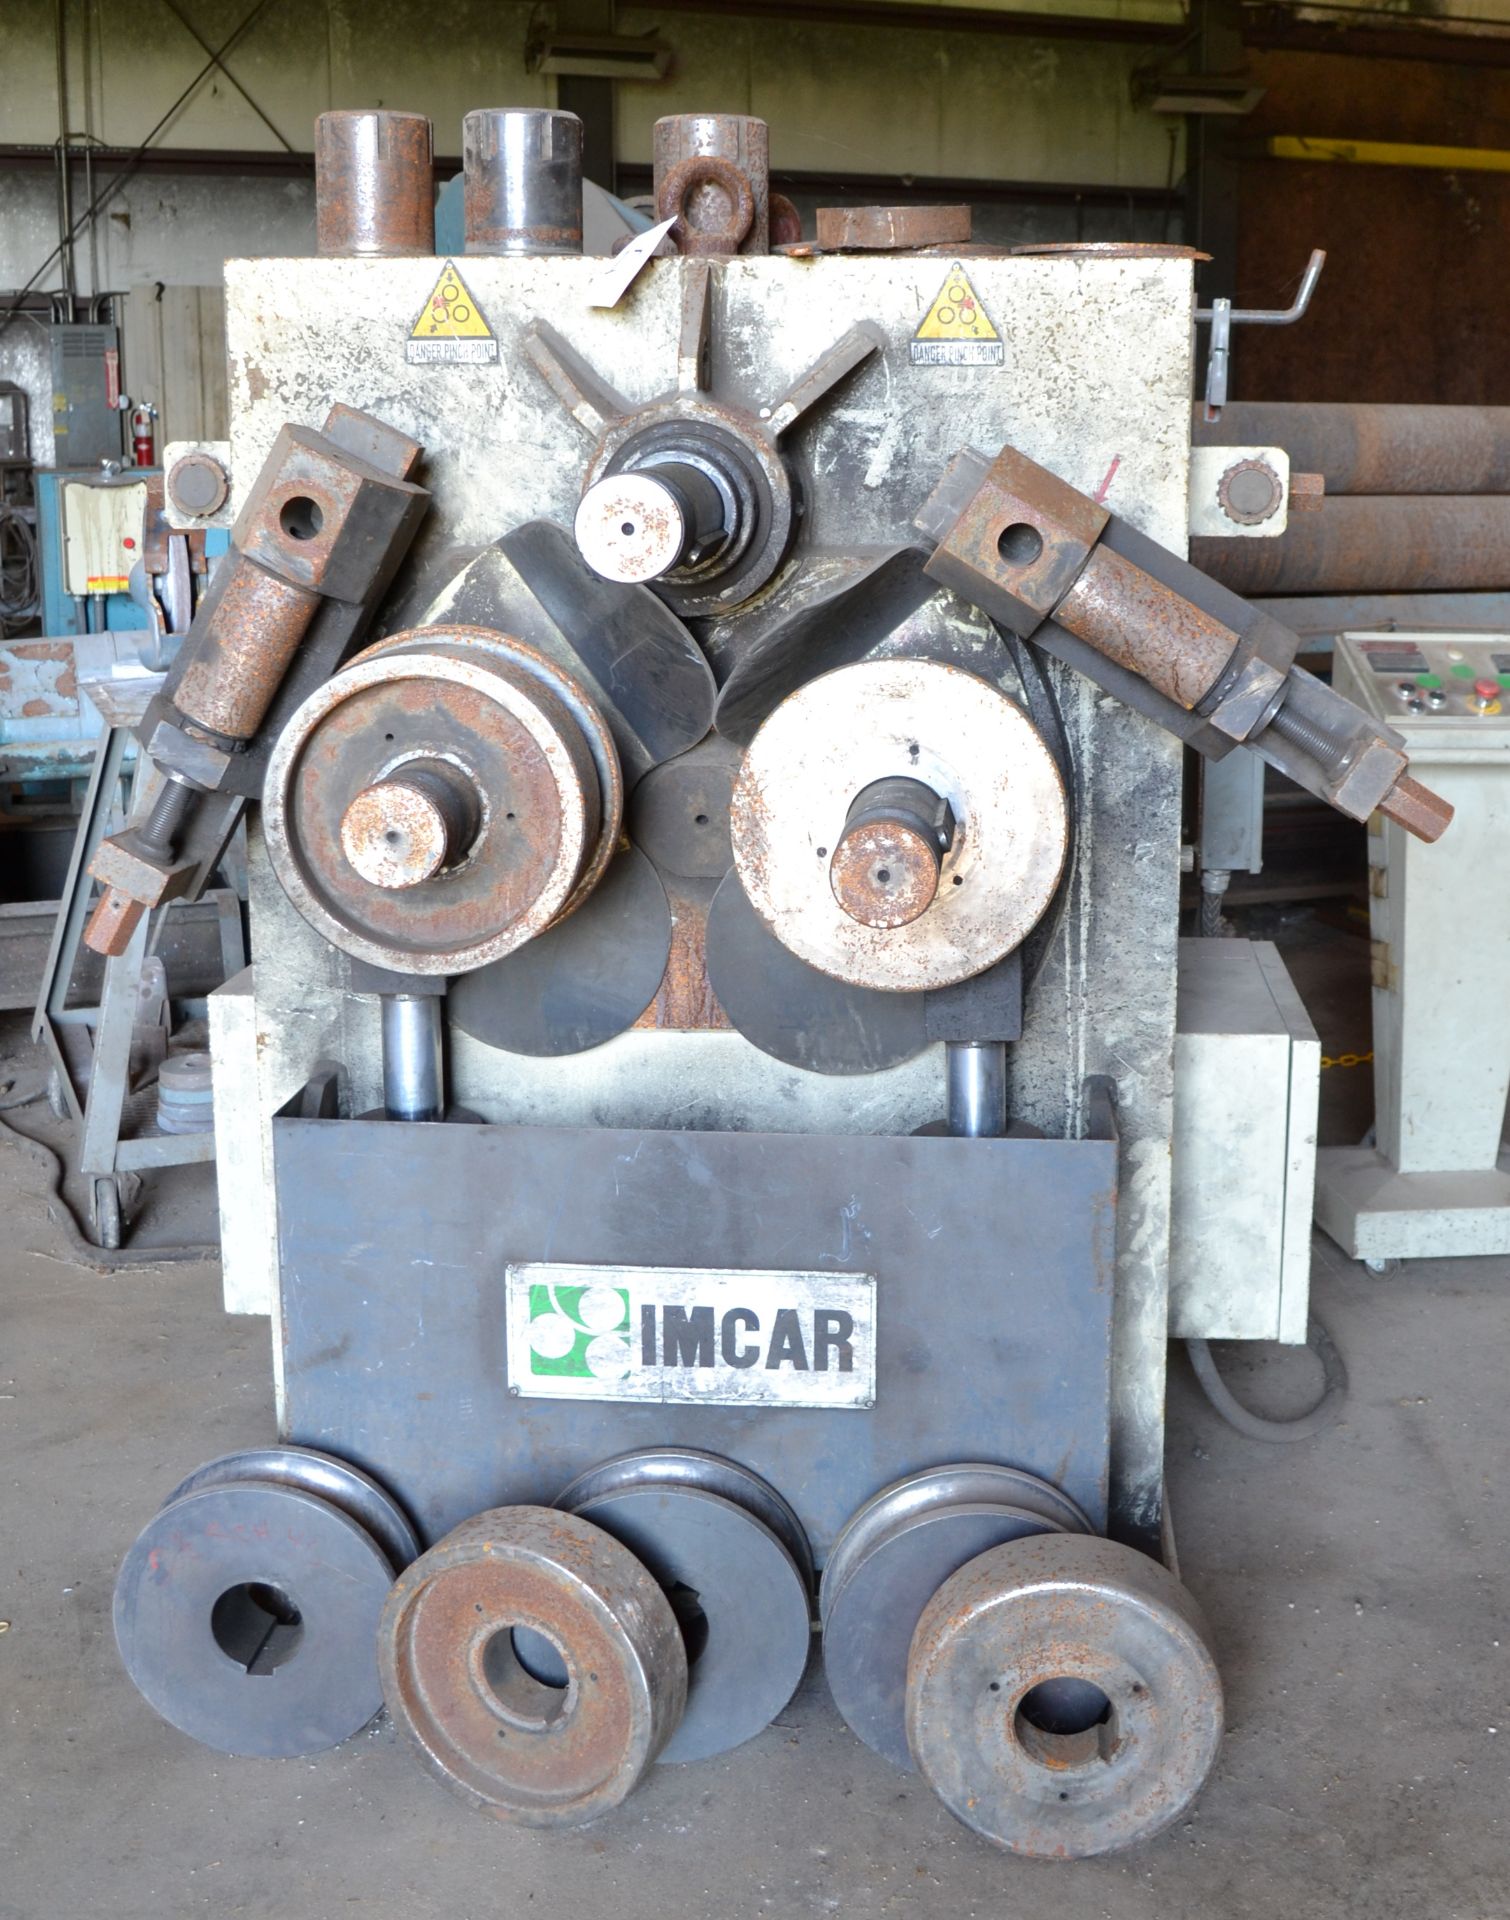 Eagle Imcar Model CPHV-100 Hydraulic Angle Iron Roll, 11 KW, S/N B325398 (2002) (RIGGER REQUIRED FOR - Image 2 of 8